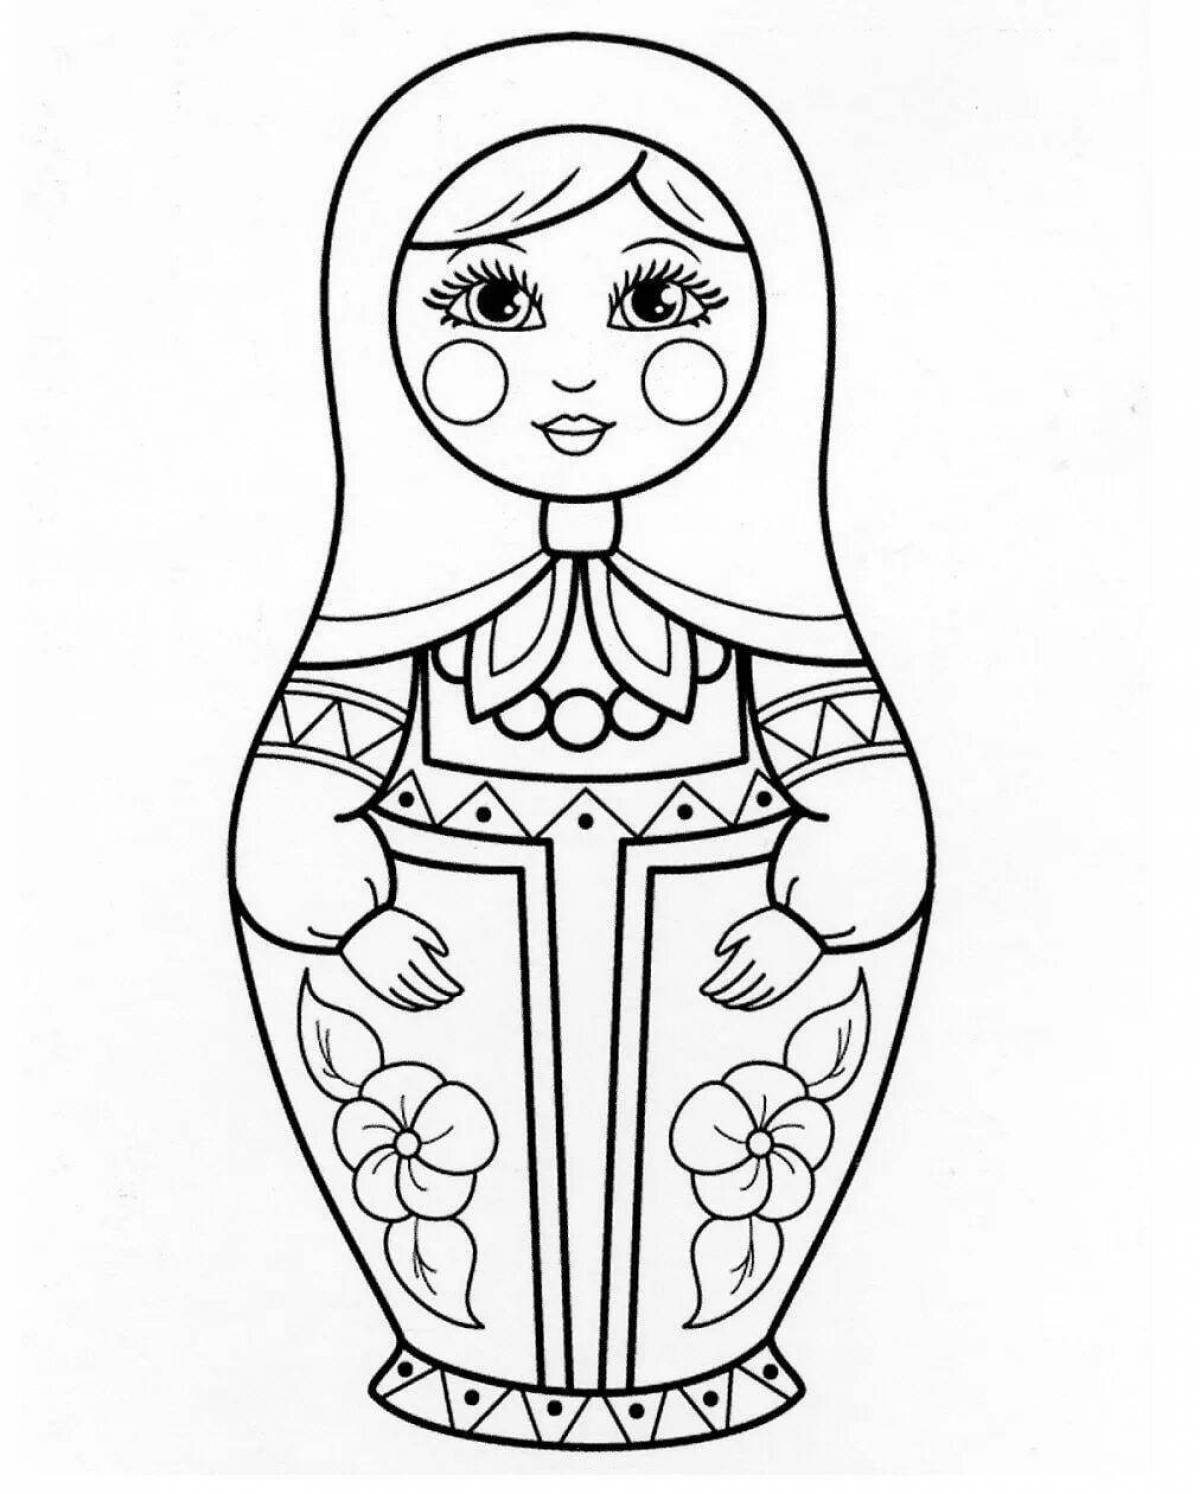 Amazing coloring page with matryoshka pattern for kids 5-6 years old